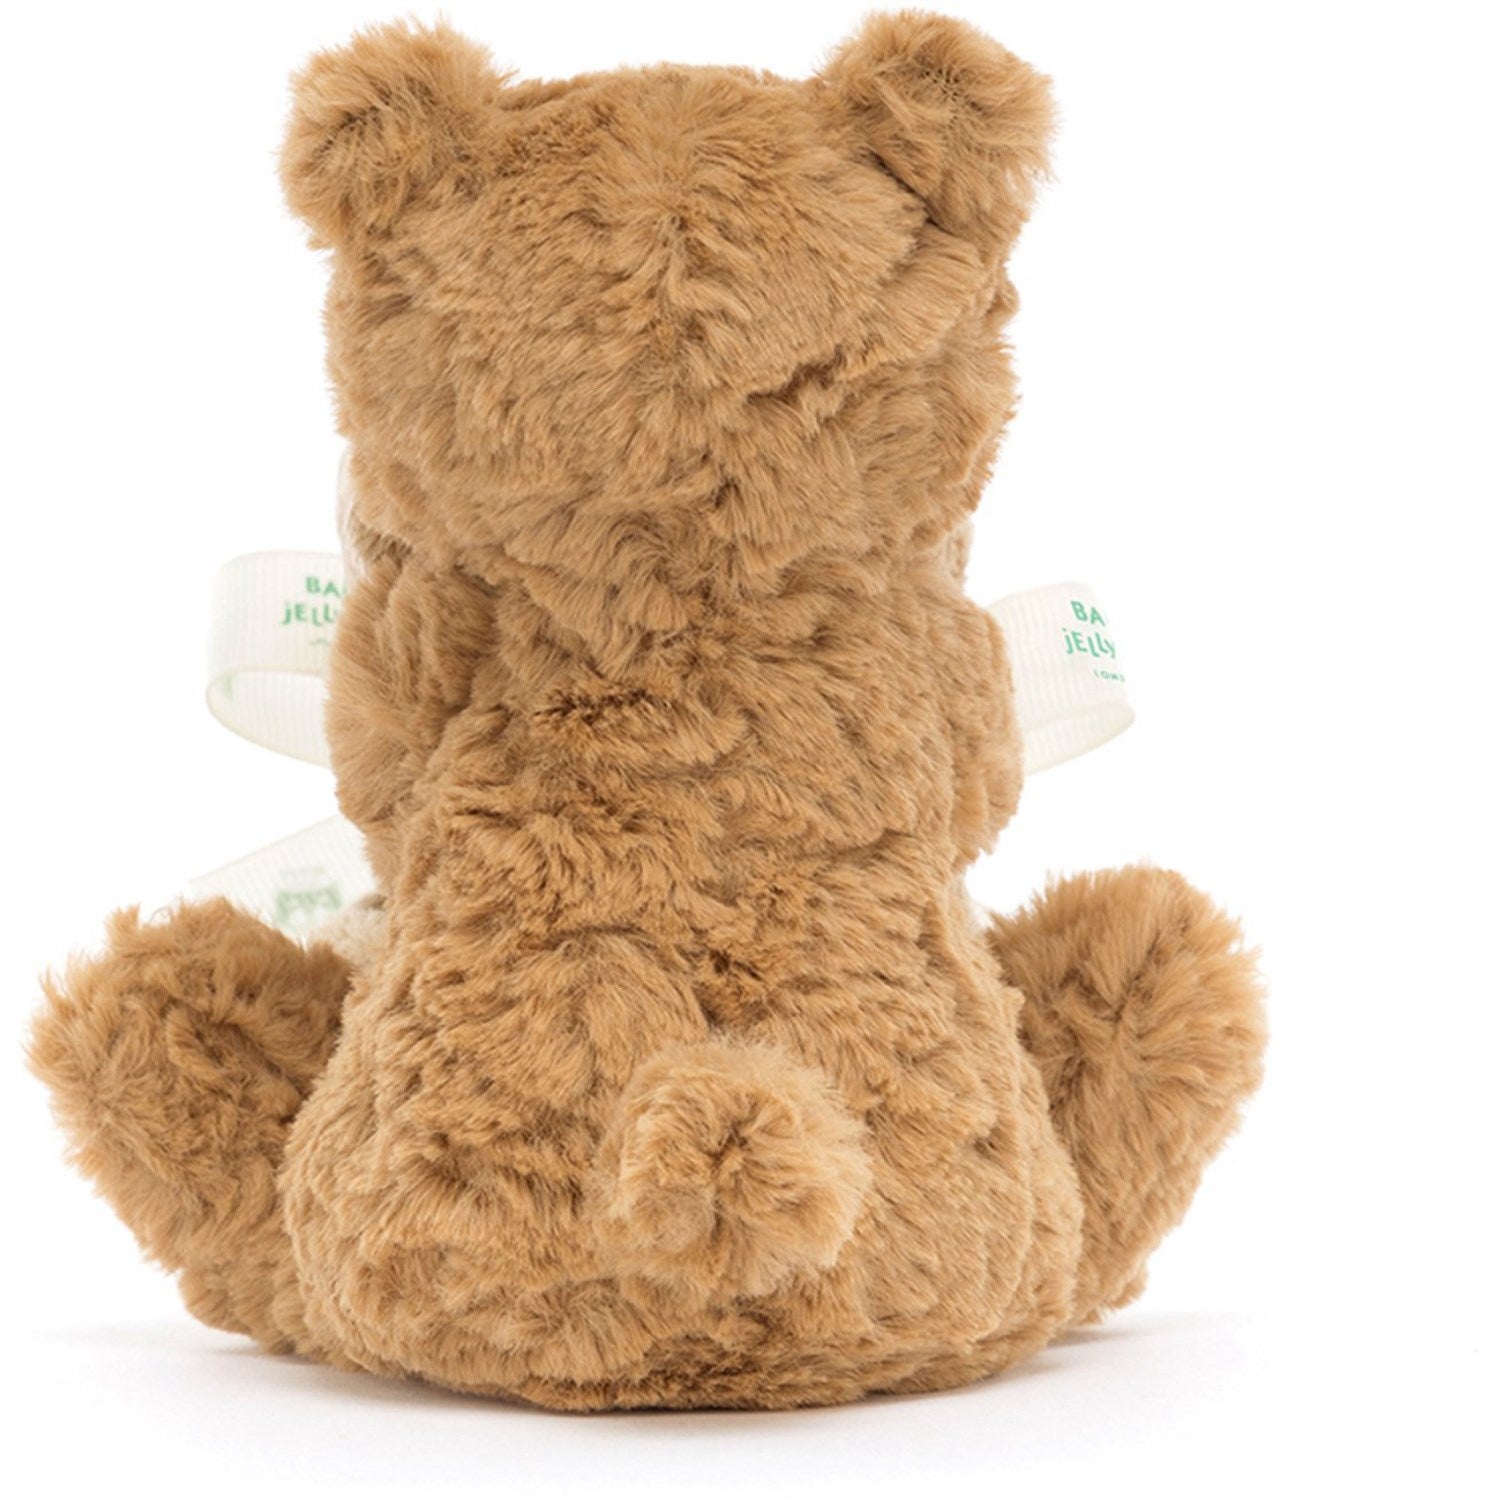 Jellycat Bartholomew Bear Soother 5